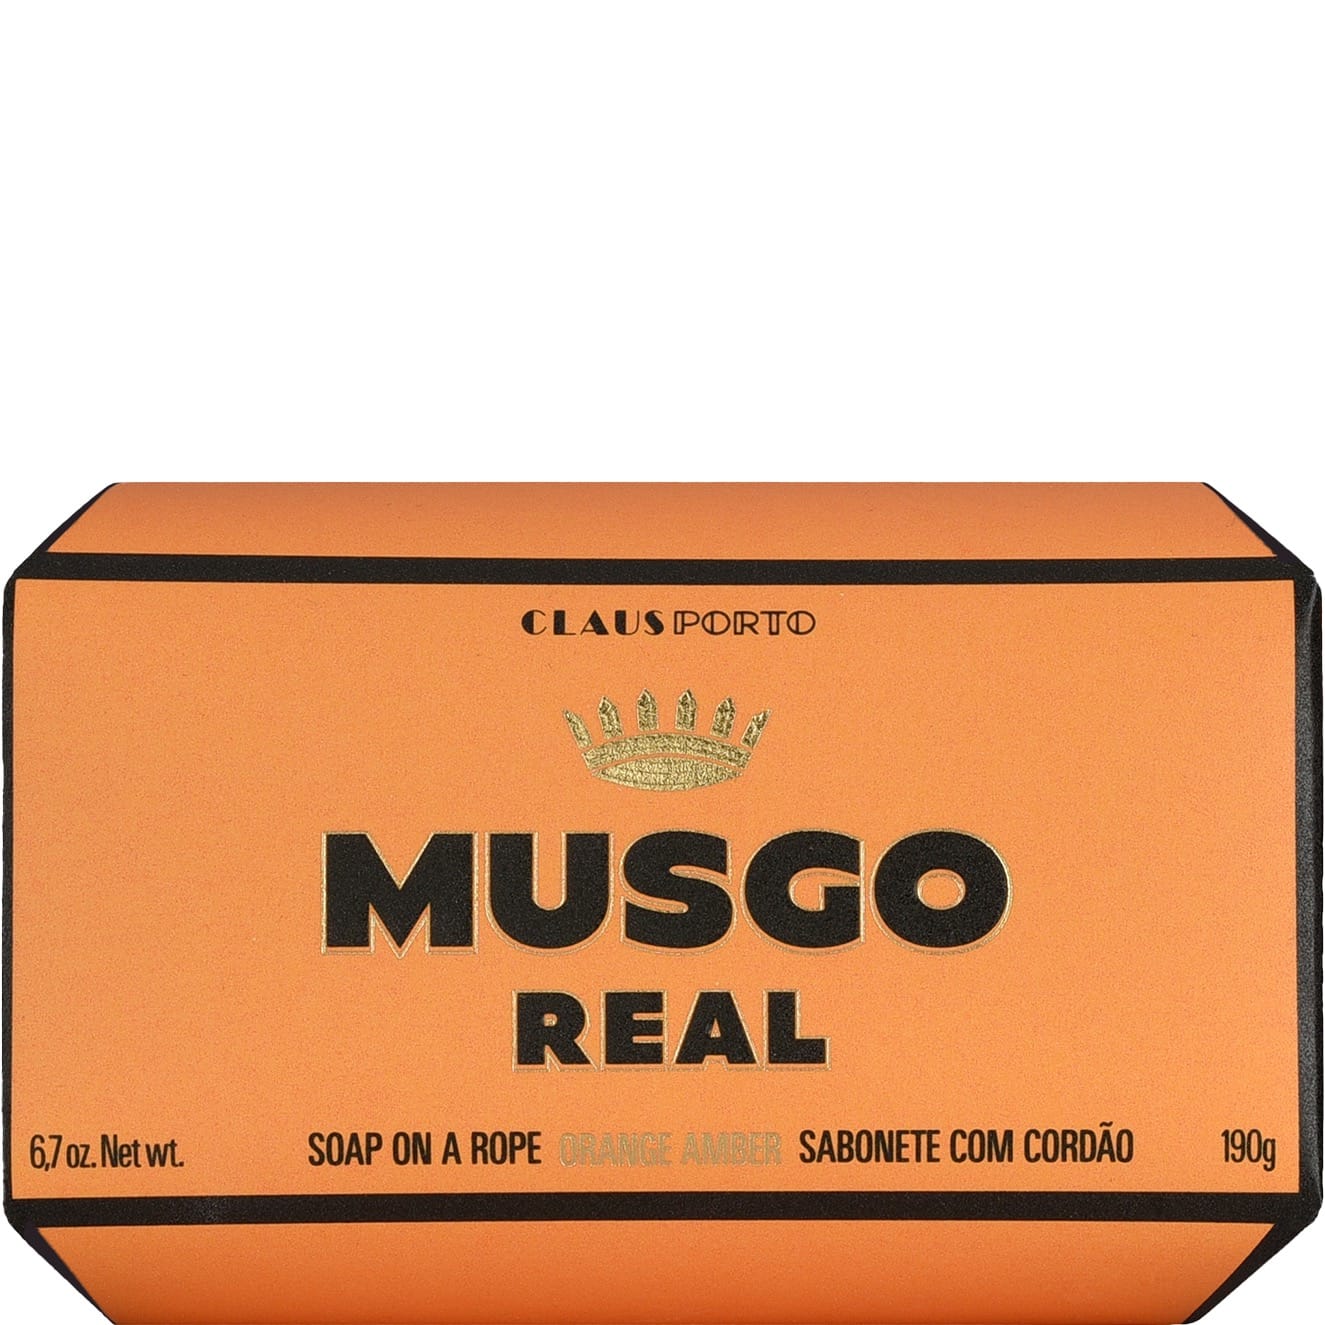 Musgo Real Soap on a Rope Orange Amber 190gr - 2.1 - MR-199CC001